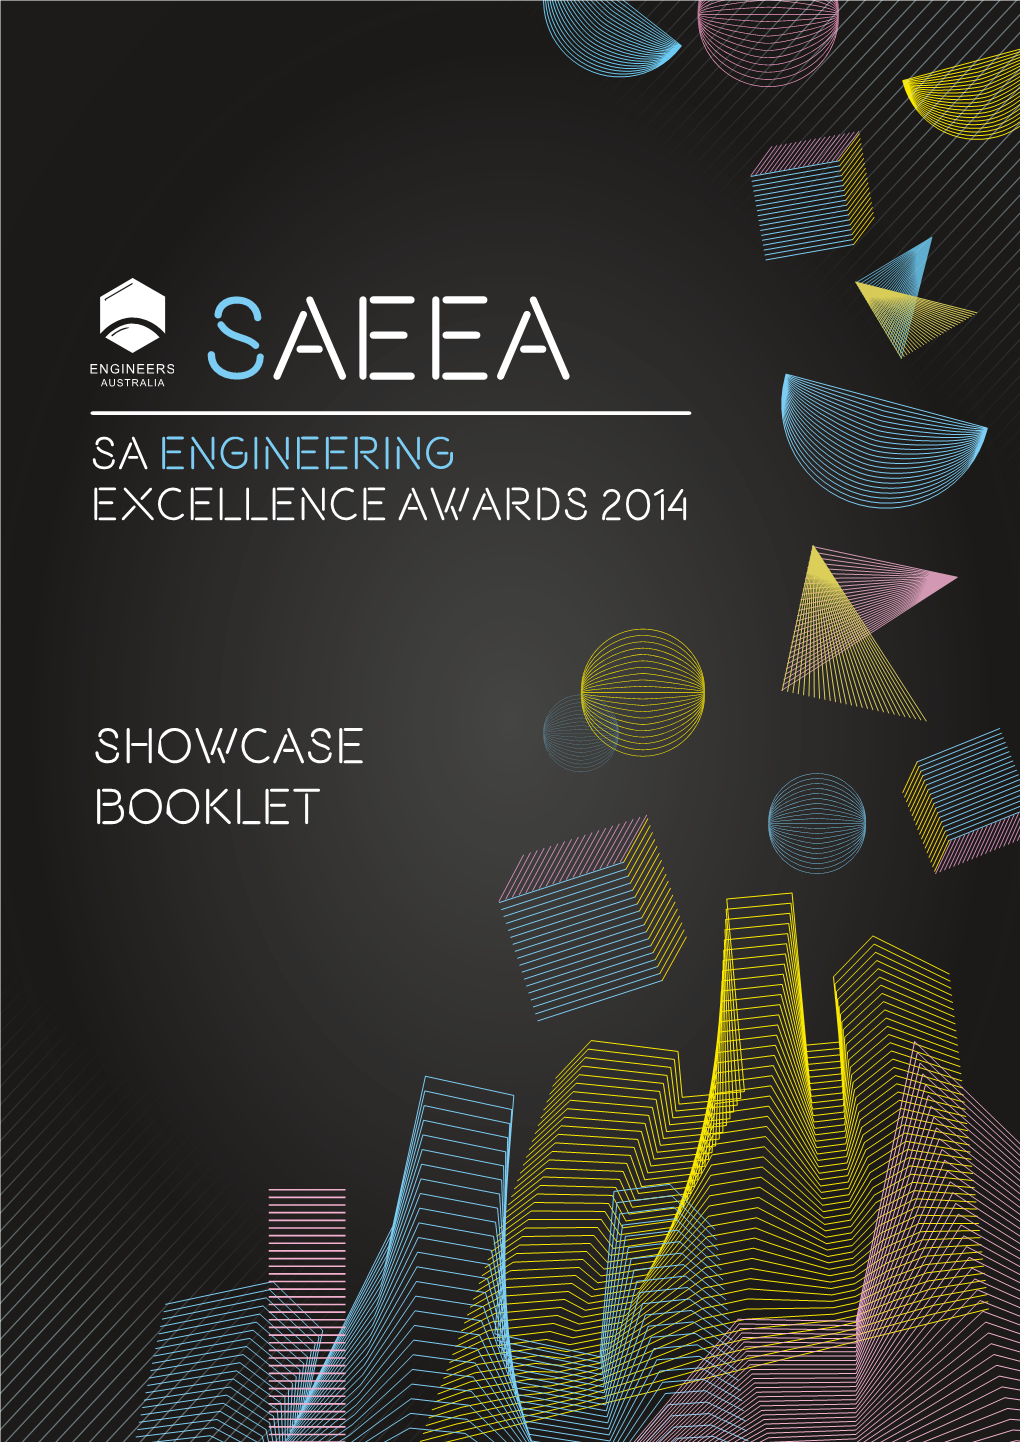 Showcase Booklet Saeea Sa Engineering Tickets on Sale Now Excellence Awards 2014